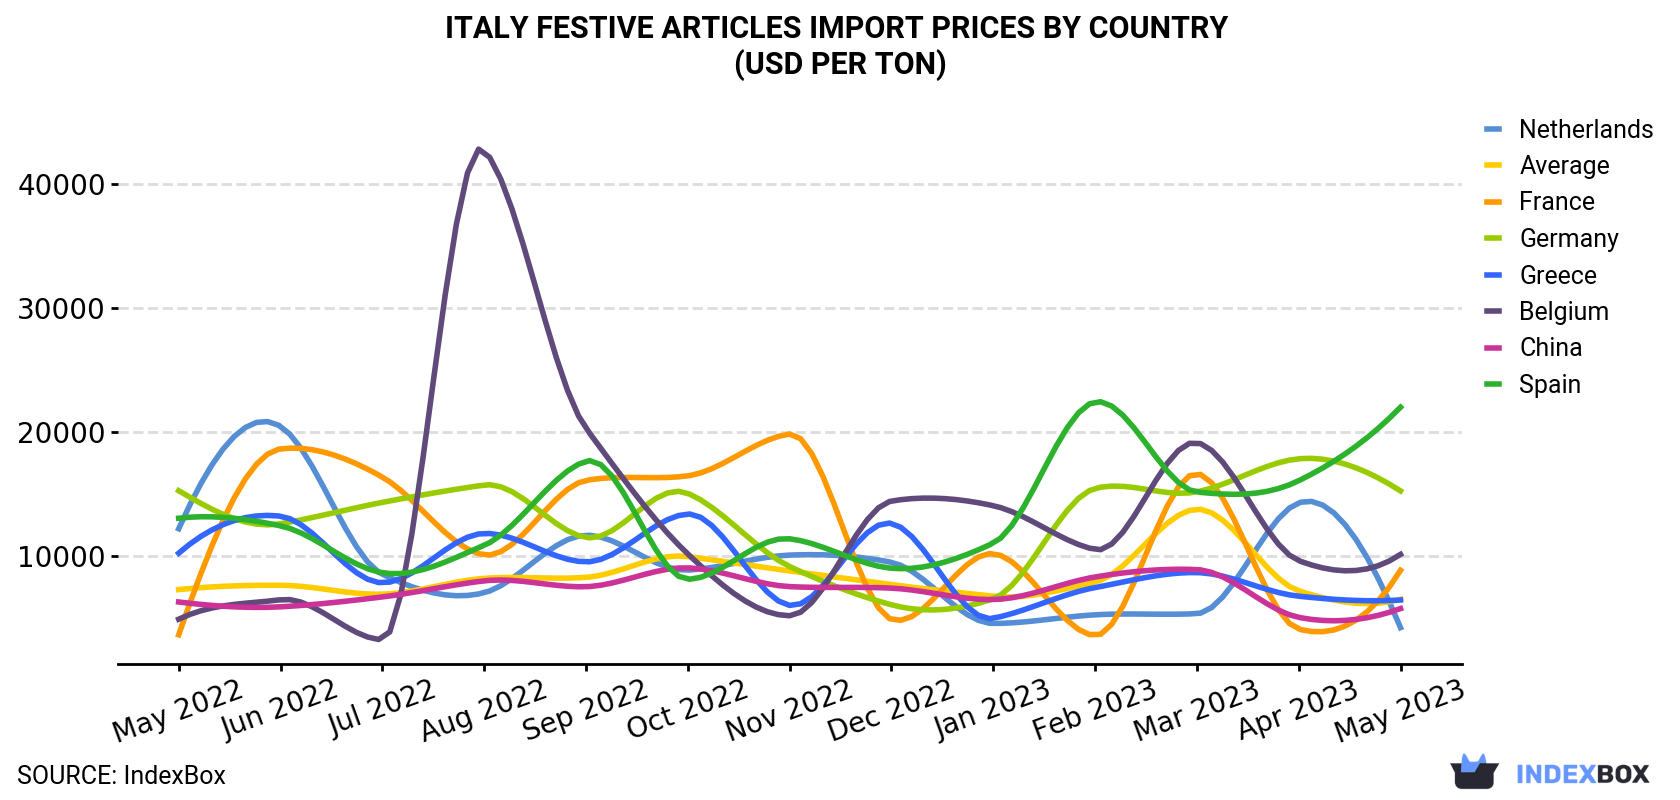 Italy Festive Articles Import Prices By Country (USD Per Ton)